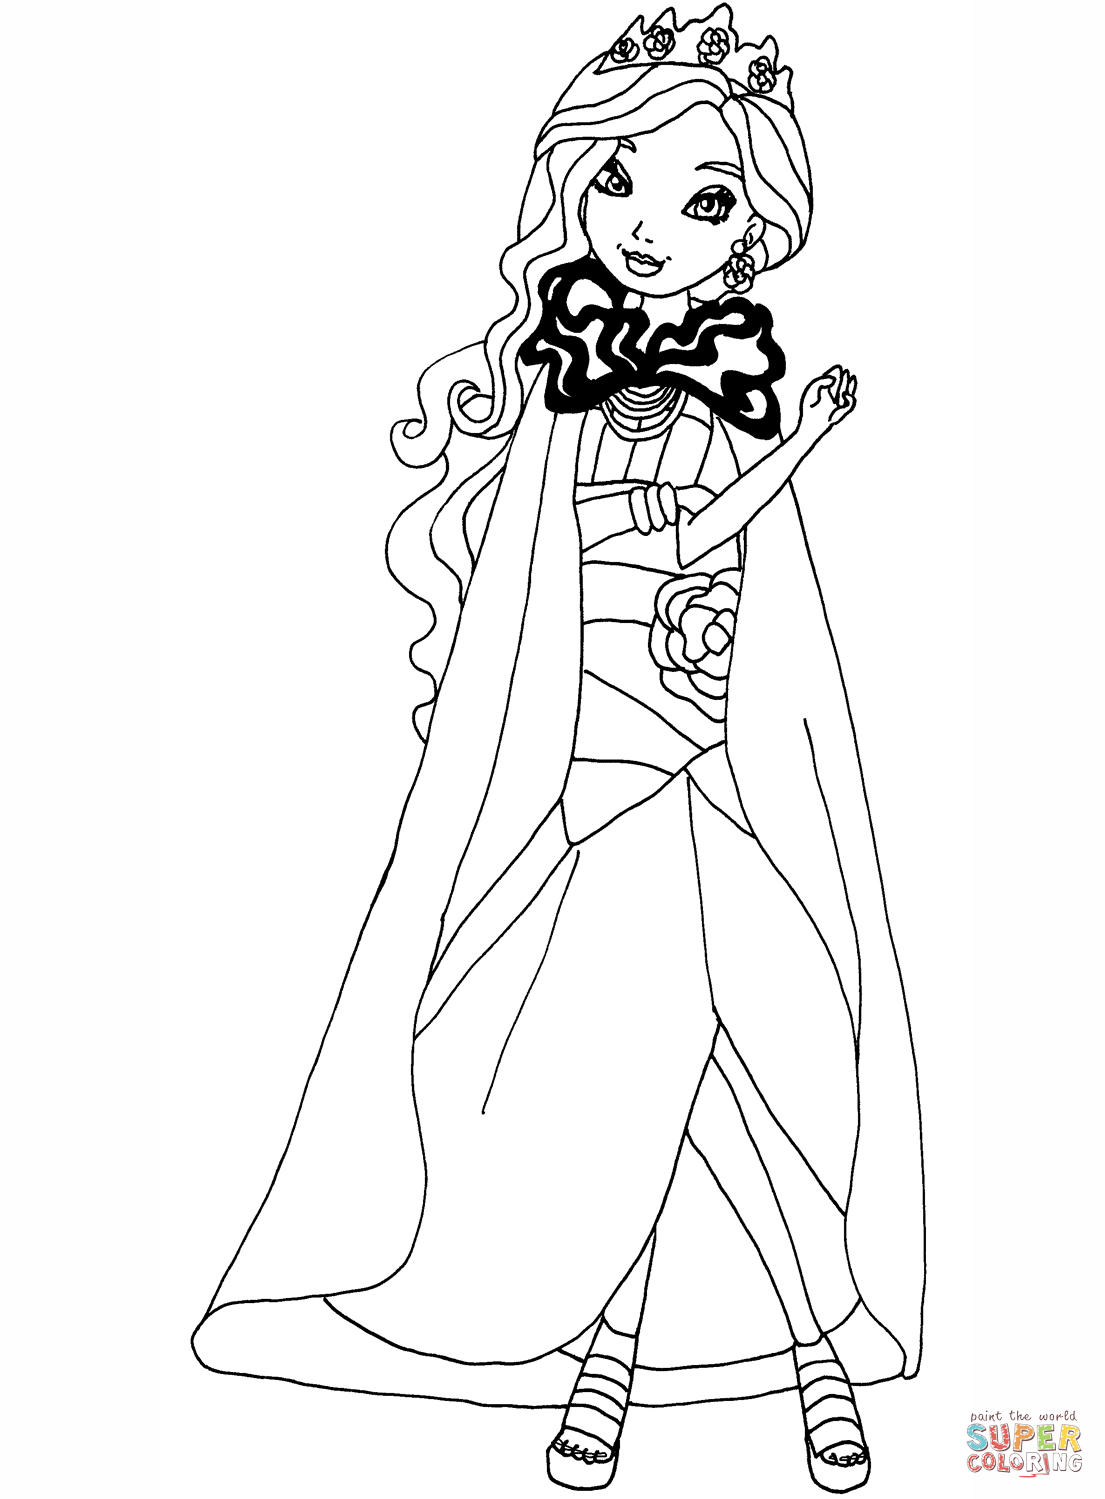 Madeline Coloring Pages Printable Ever After High Coloring Pages Free Coloring Pages